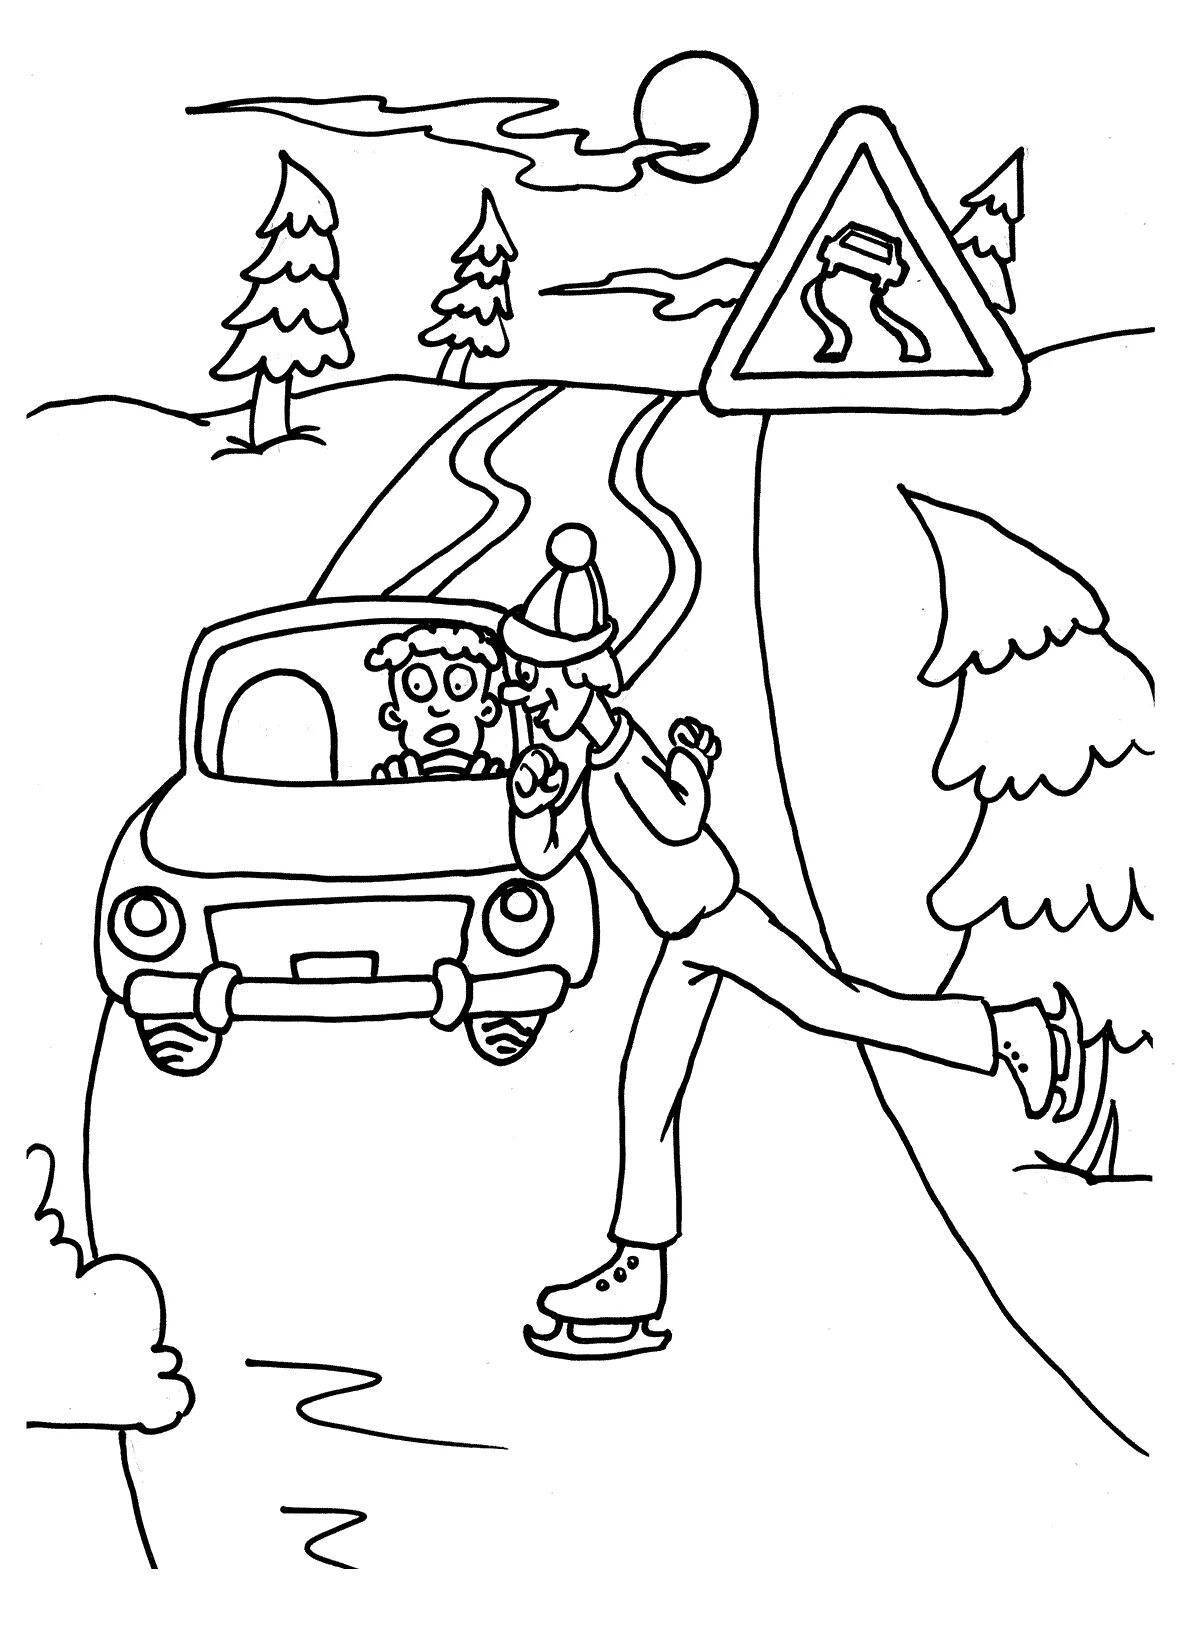 Luminous winter safety coloring page